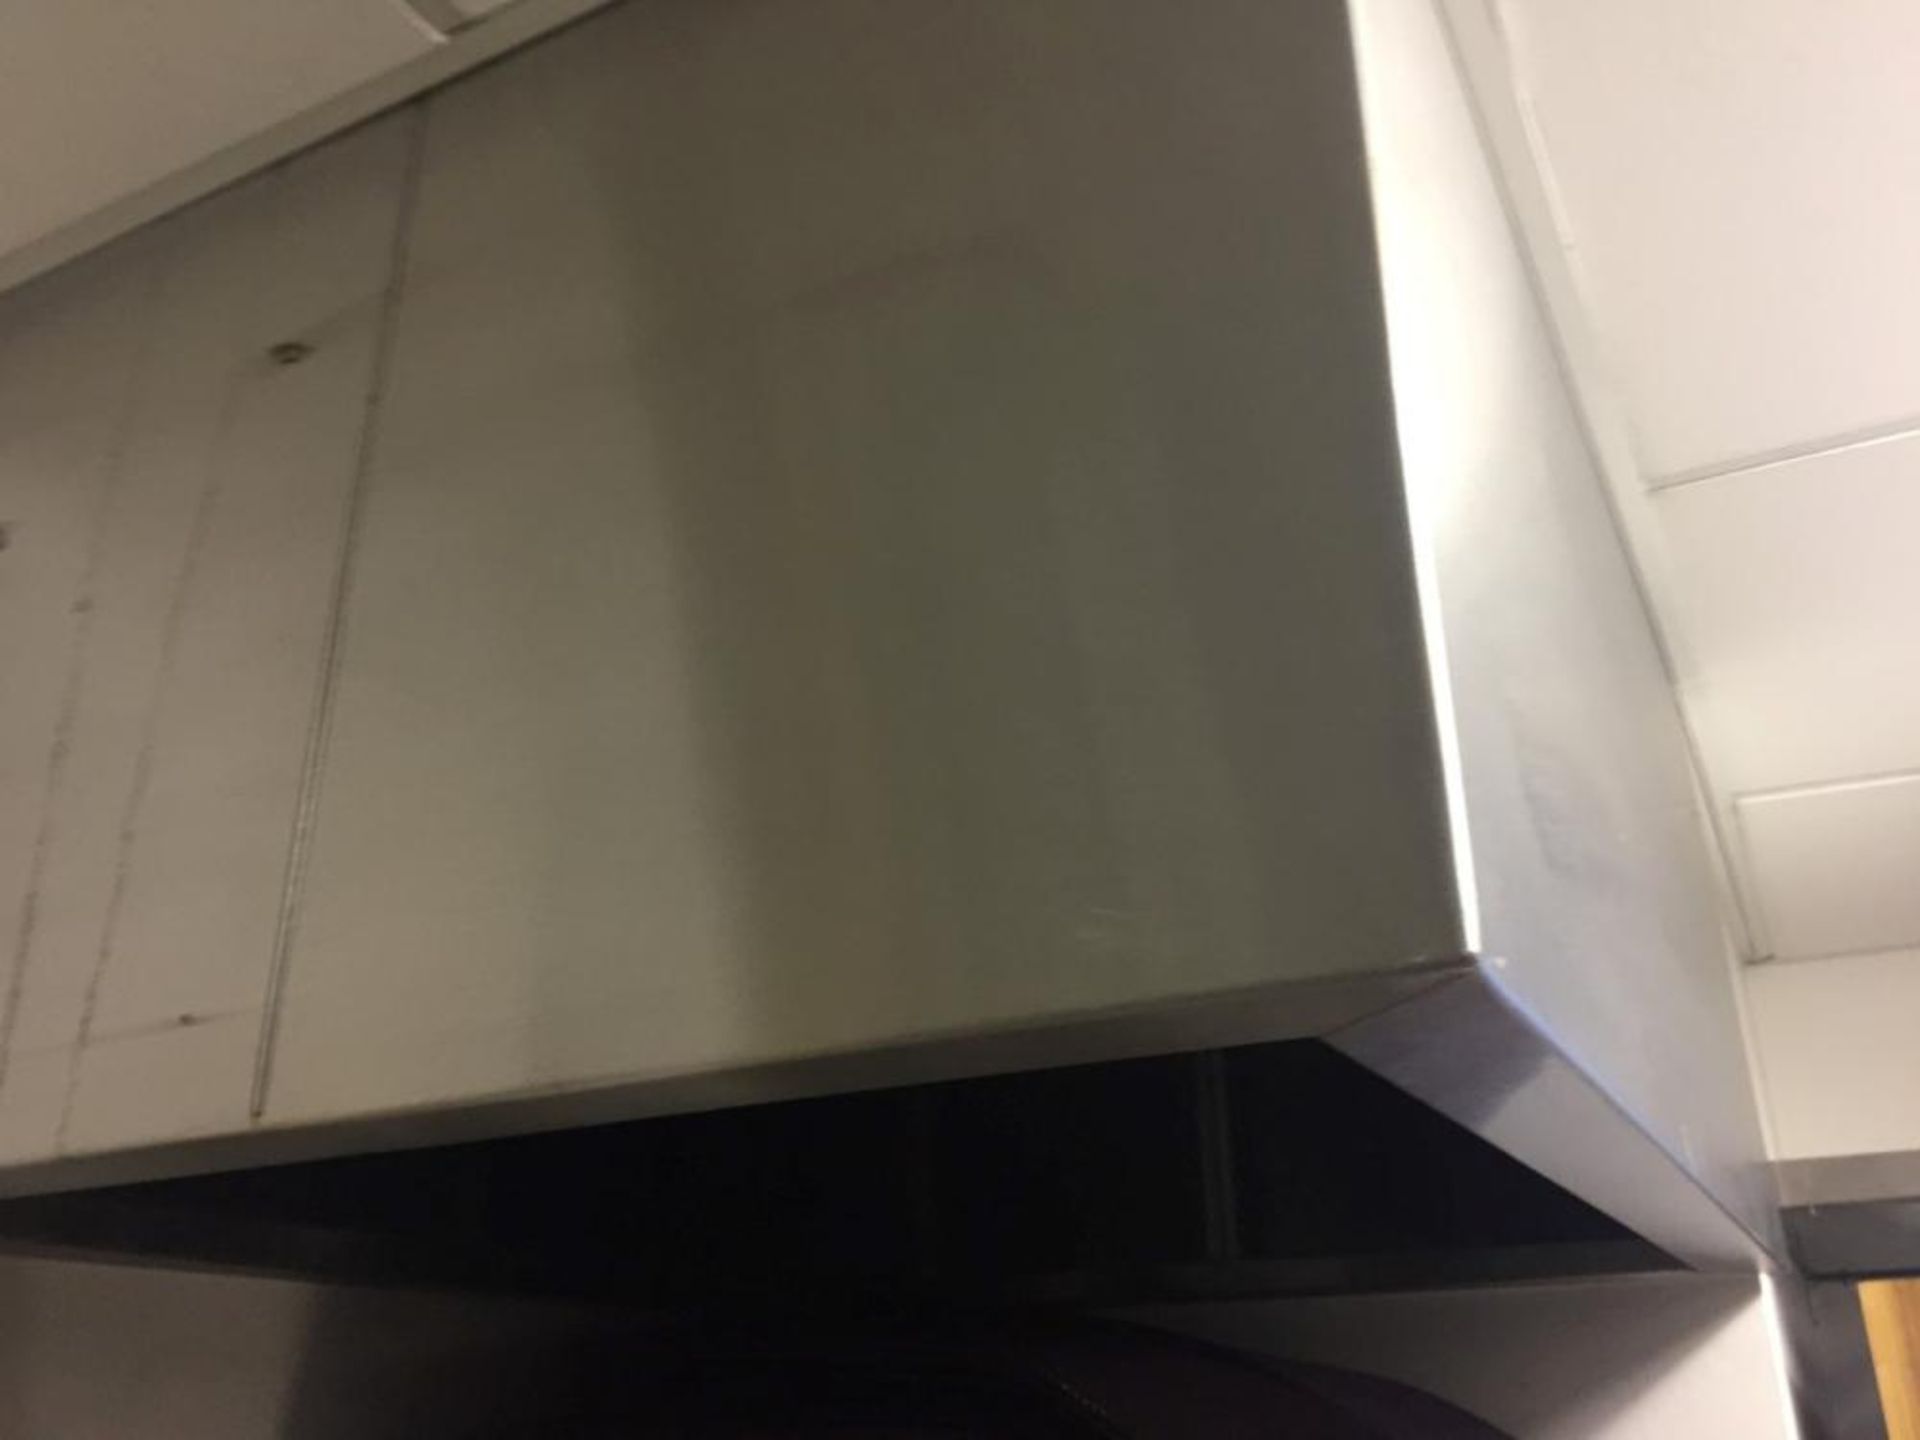 1 x Commercial Stainless Steel Extractor Hood - Dimensions: W90 x D75 x H50cm - CL191 - Location: - Image 2 of 3